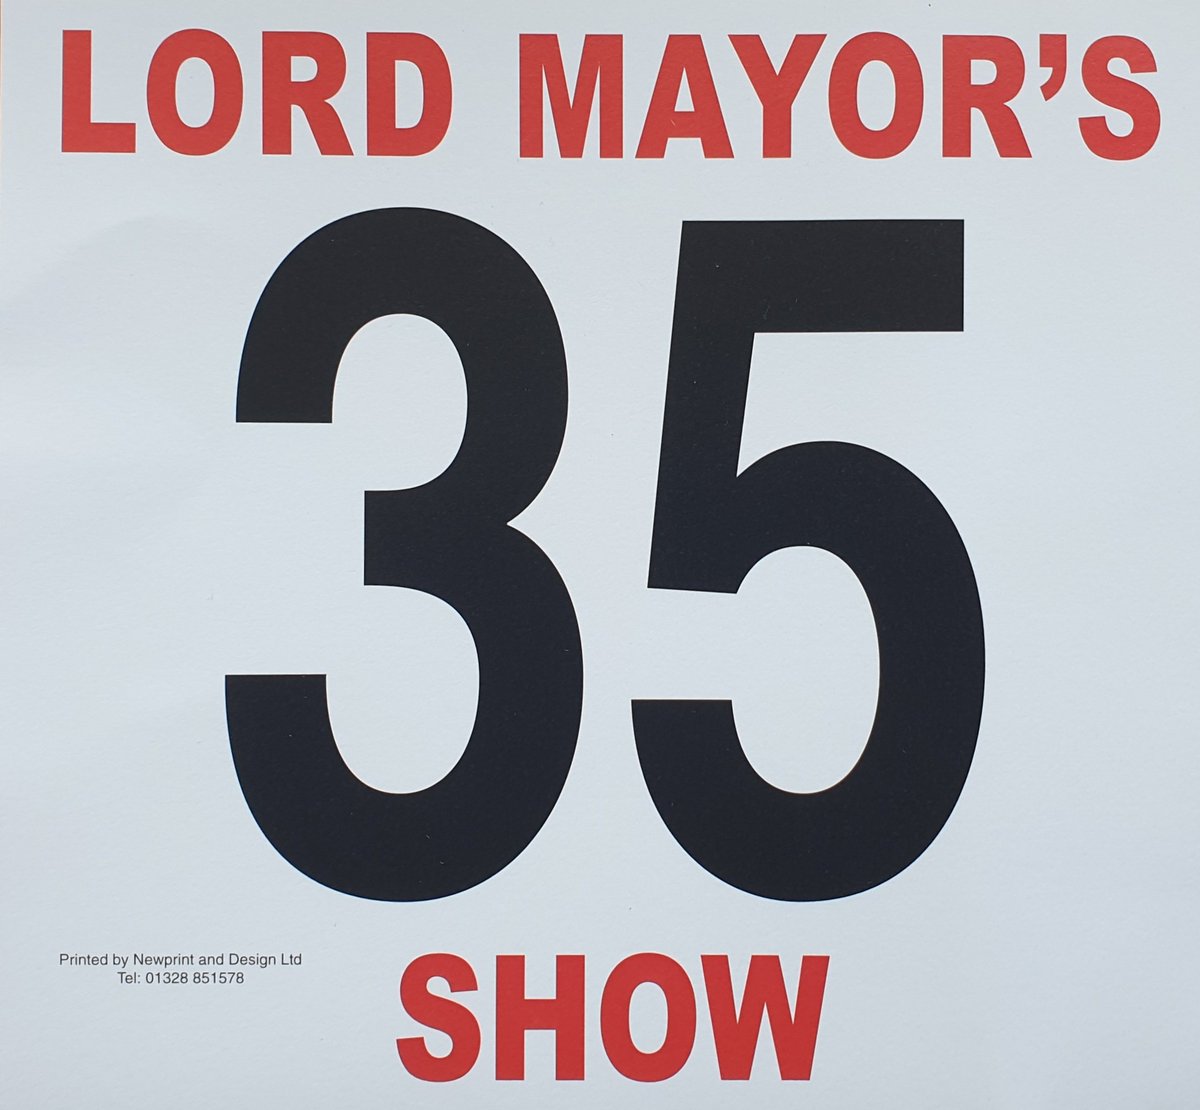 We are delighted to confirm that we are number 35 in this year's Lord Mayor's Show in the City of London, right in front of our friends from @YOULondon1! Keep an eye out for us on Saturday 12th November 🥁 #LordMayorsShow #BoysBrigade #GirlsBrigade